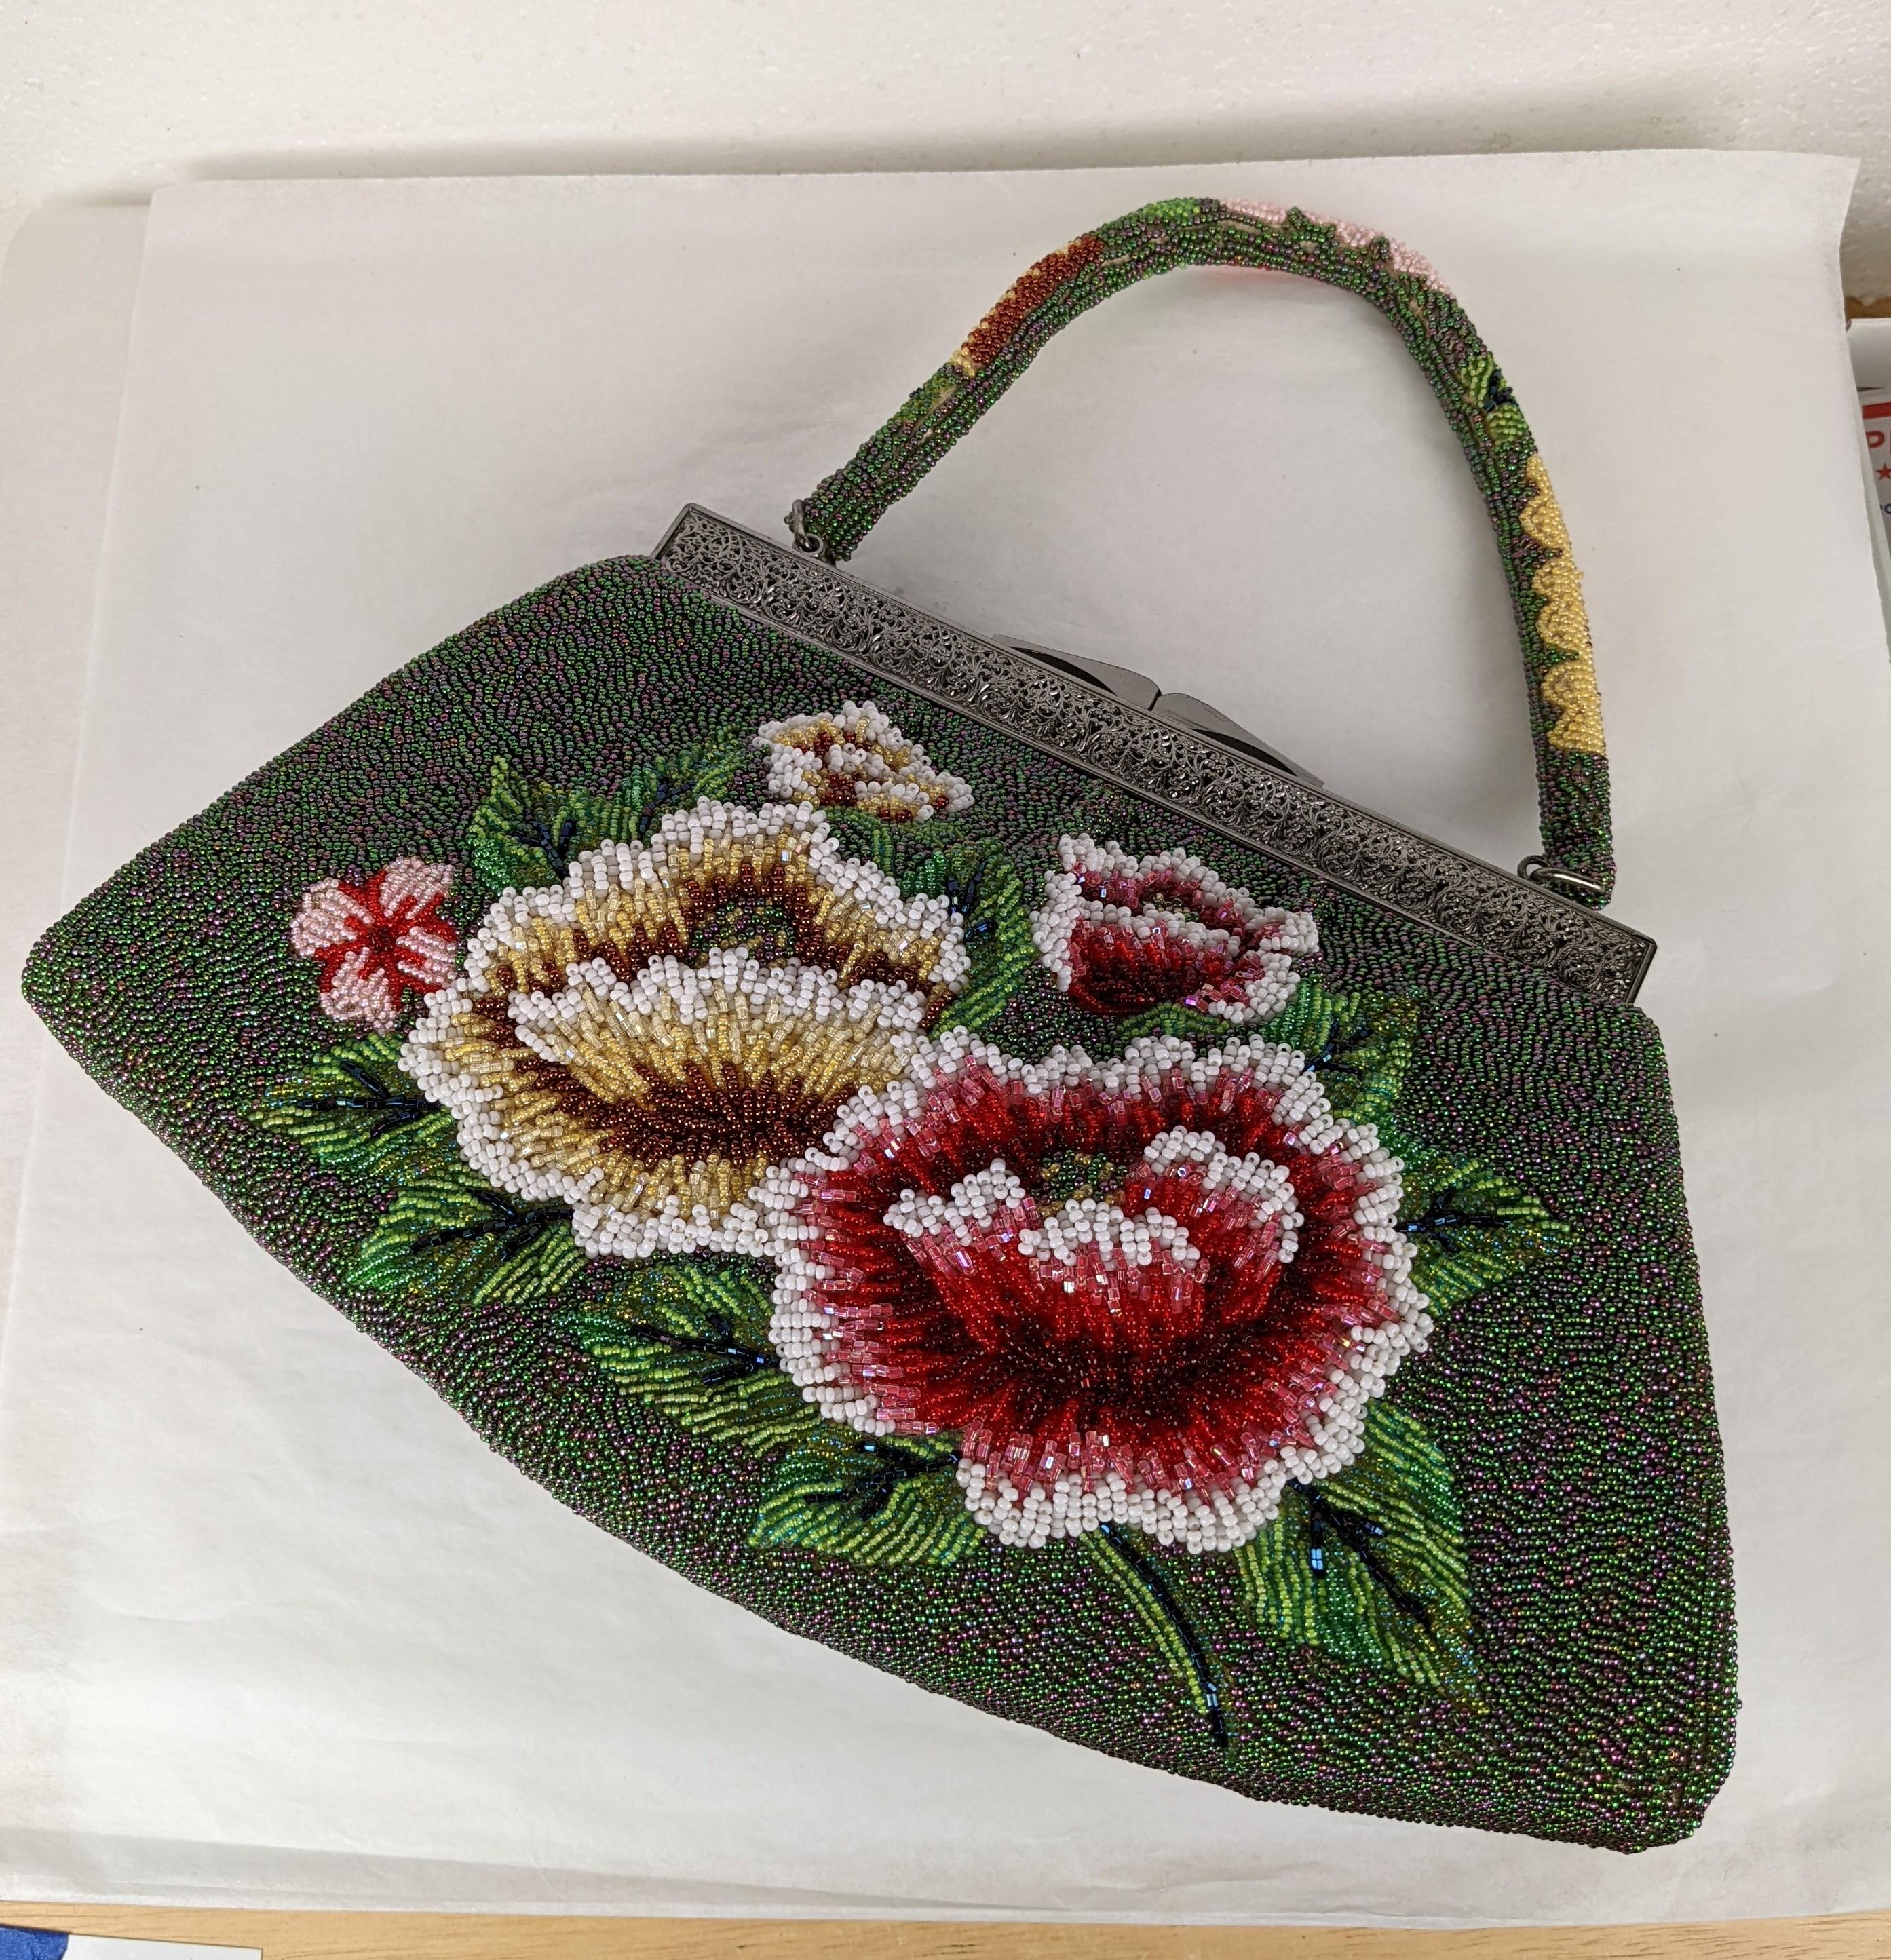 Charming 3 Dimensional Elaborately Beaded Floral 1960's Bag from Korea. Interesting 